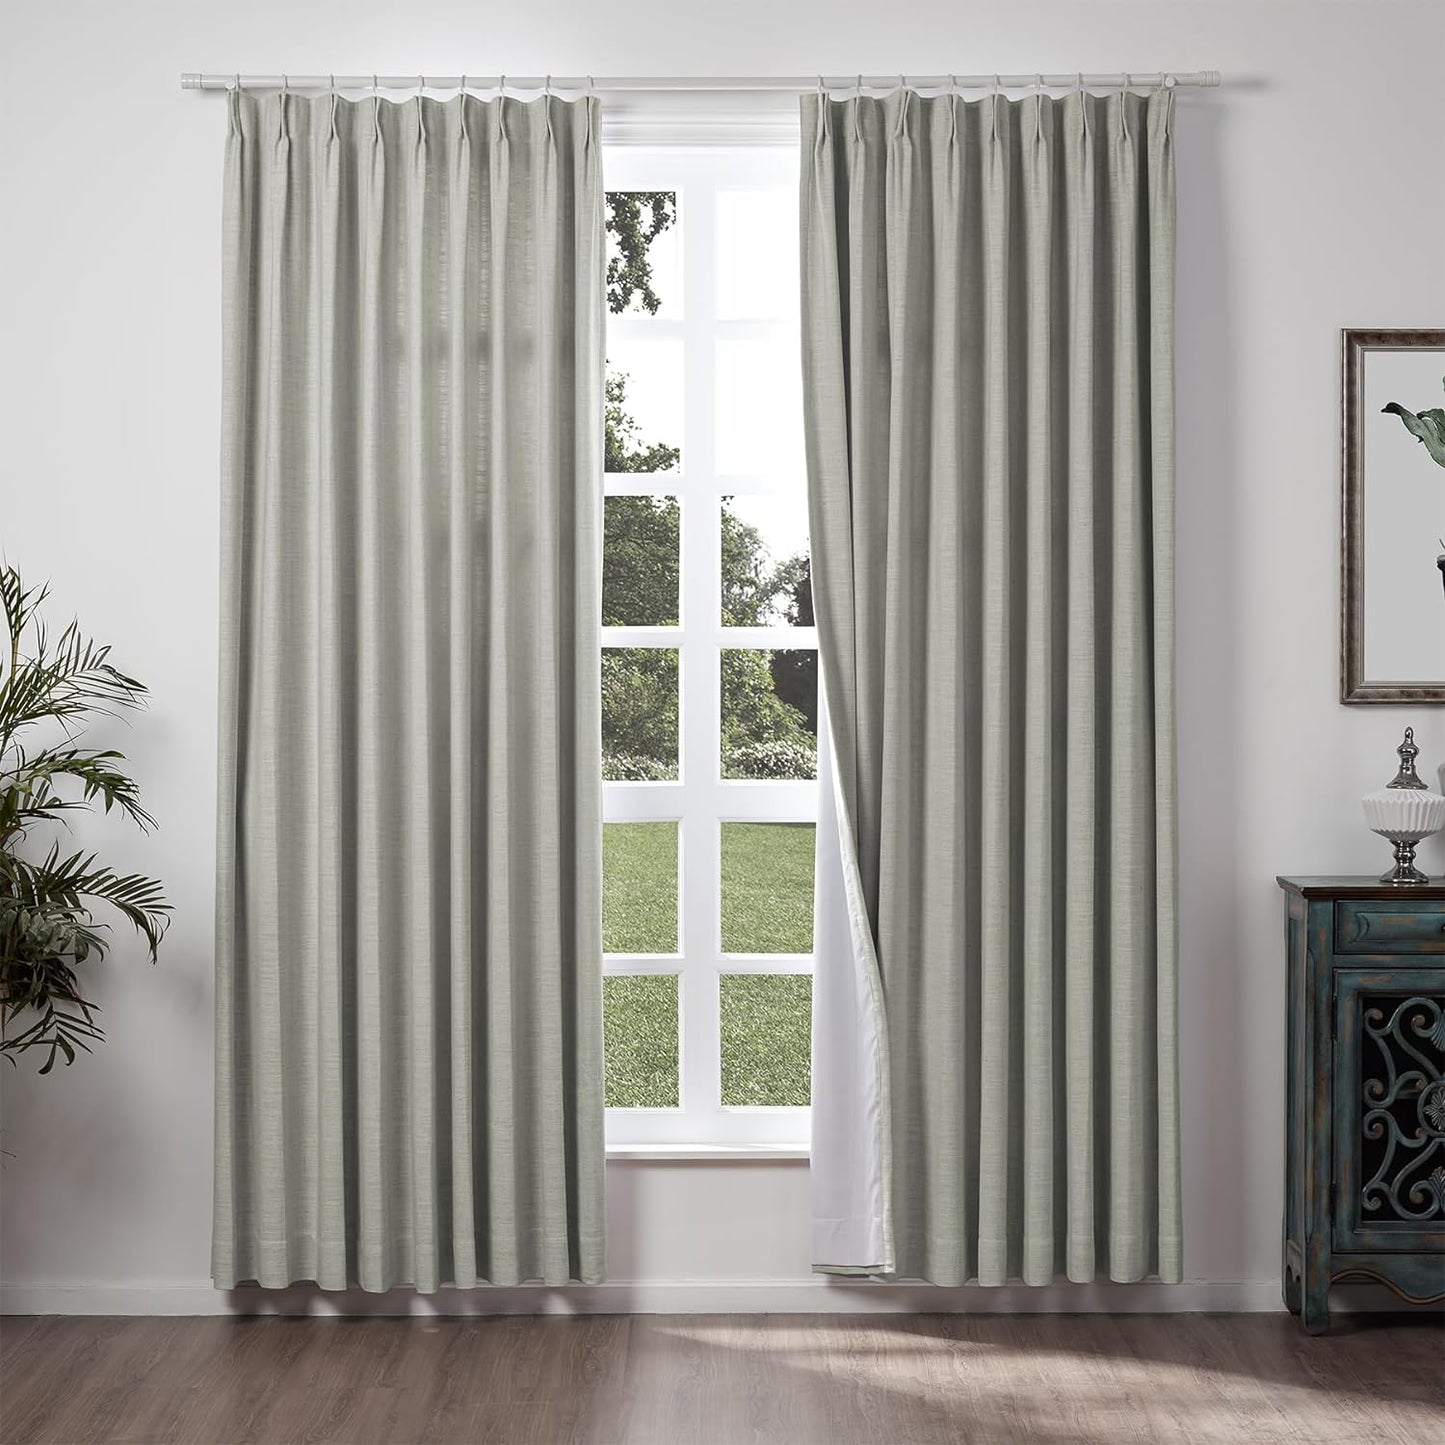 Chadmade 50" W X 84" L Polyester Linen Drape with Blackout Lining Pinch Pleat Curtain for Sliding Door Patio Door Living Room Bedroom, (1 Panel) Beige White Liz Collection  ChadMade Pure Cahmere (15) 72Wx84L 